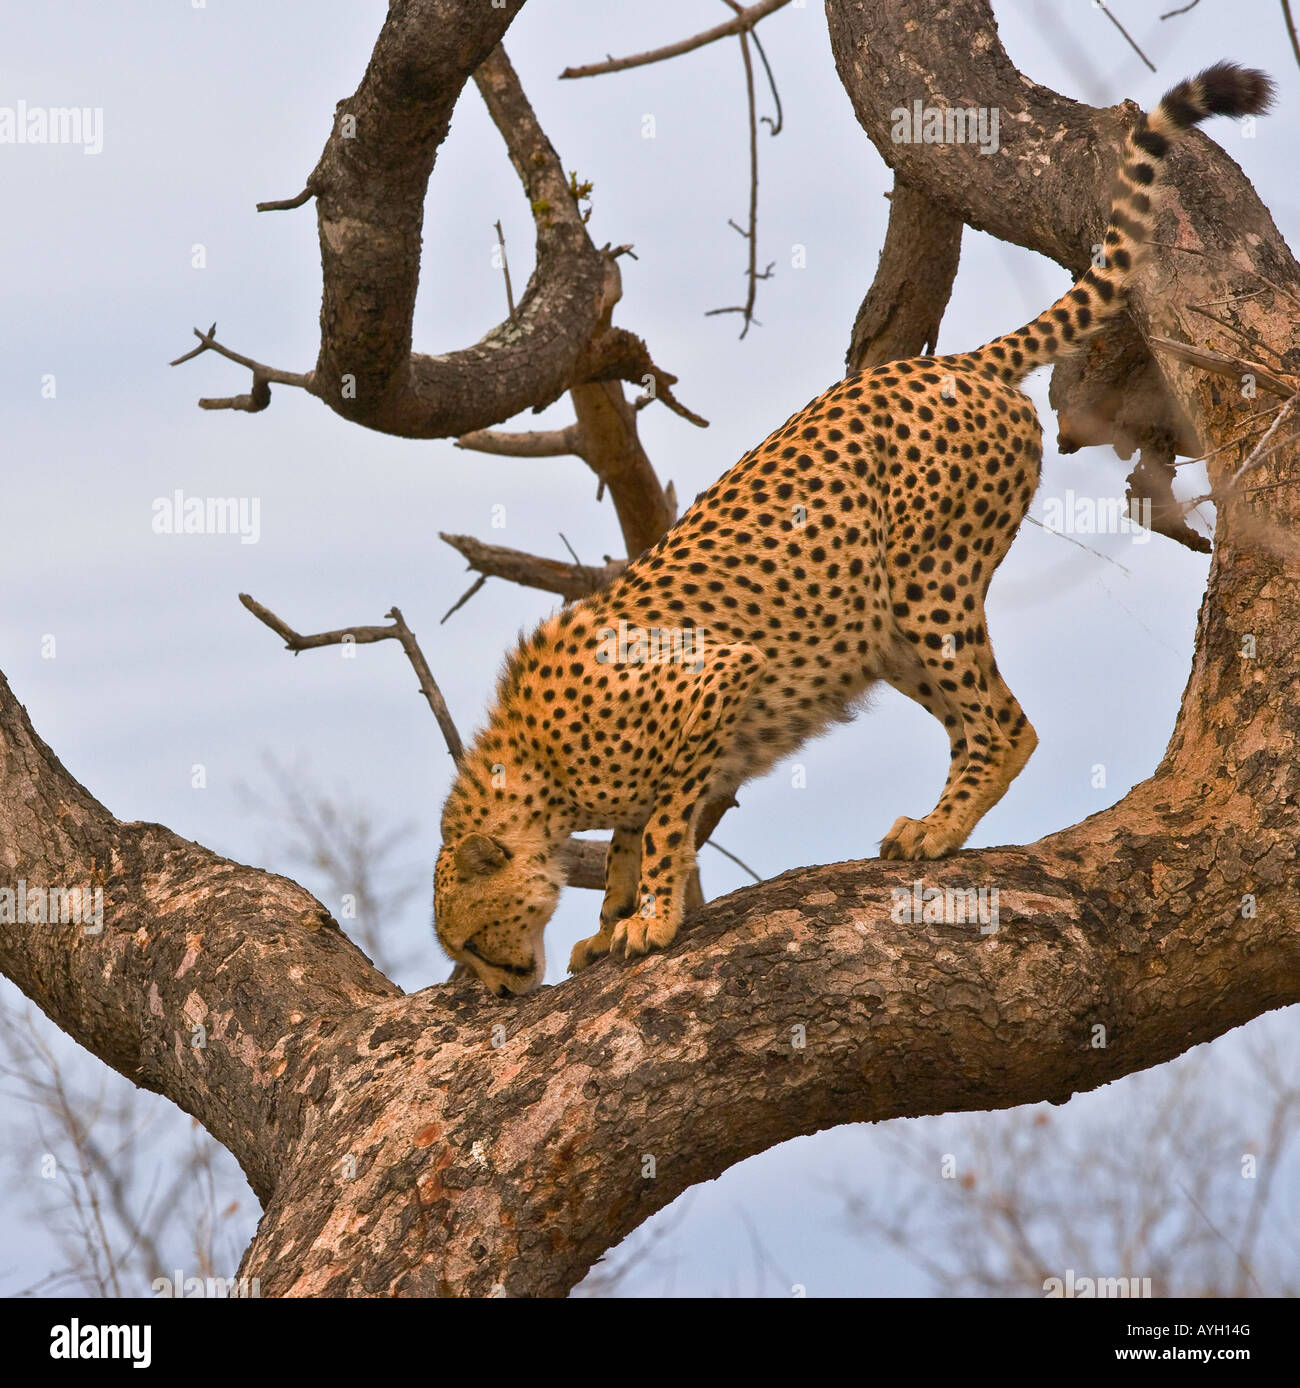 Cheetah in tree, Greater Kruger National Park, South Africa Stock Photo